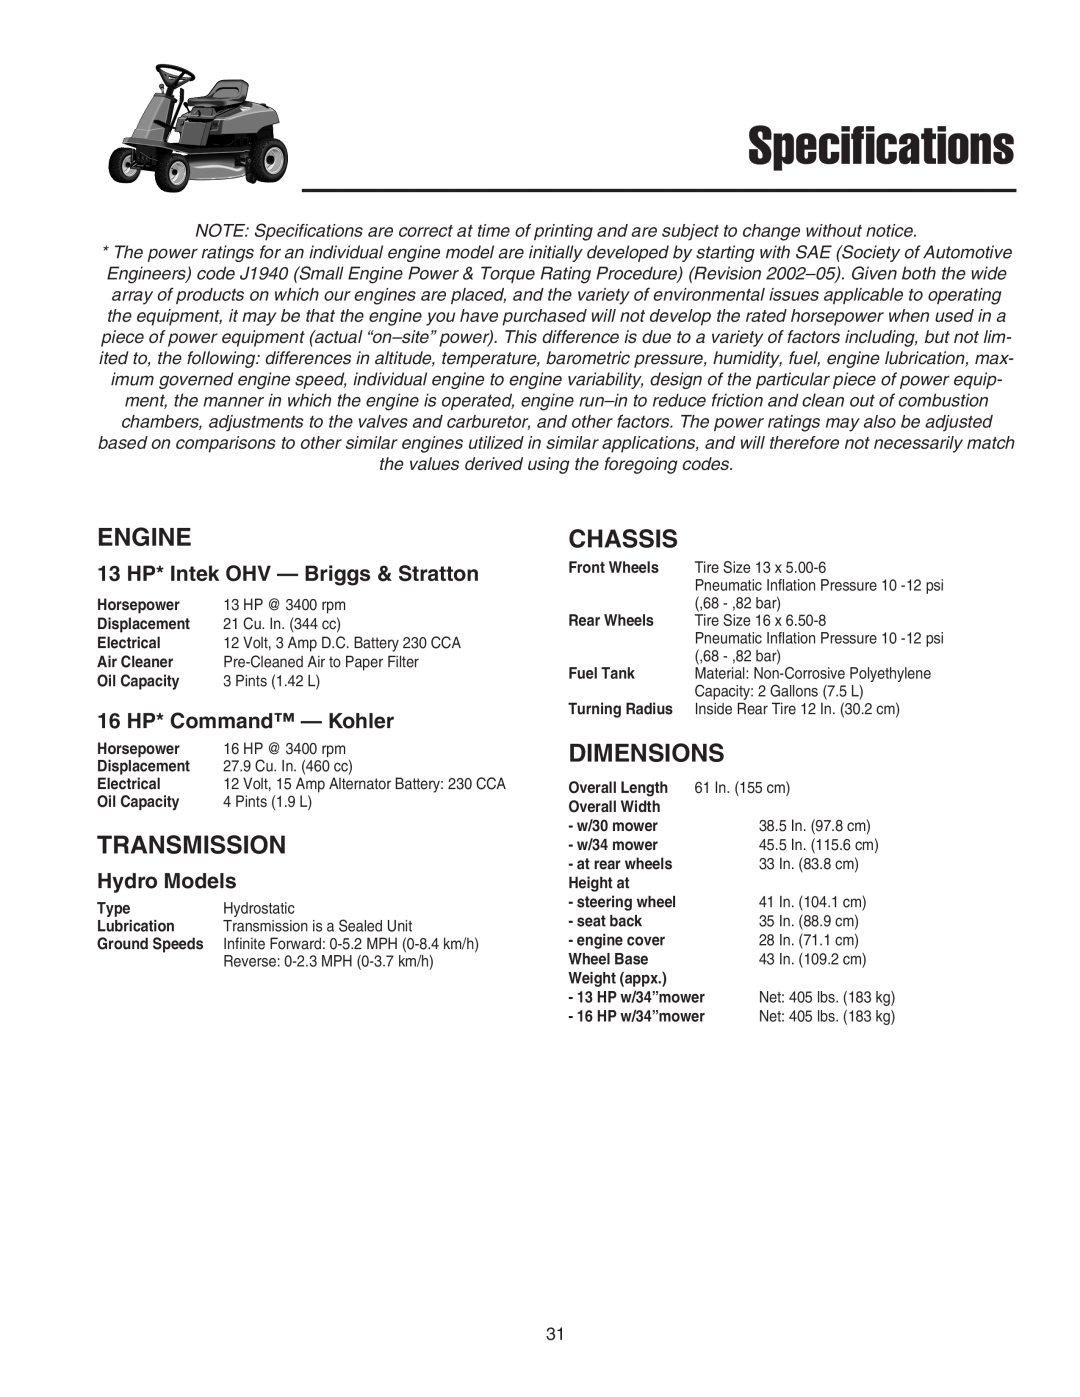 Snapper 400 Series manual Specifications, Engine, Transmission, Chassis, Dimensions 